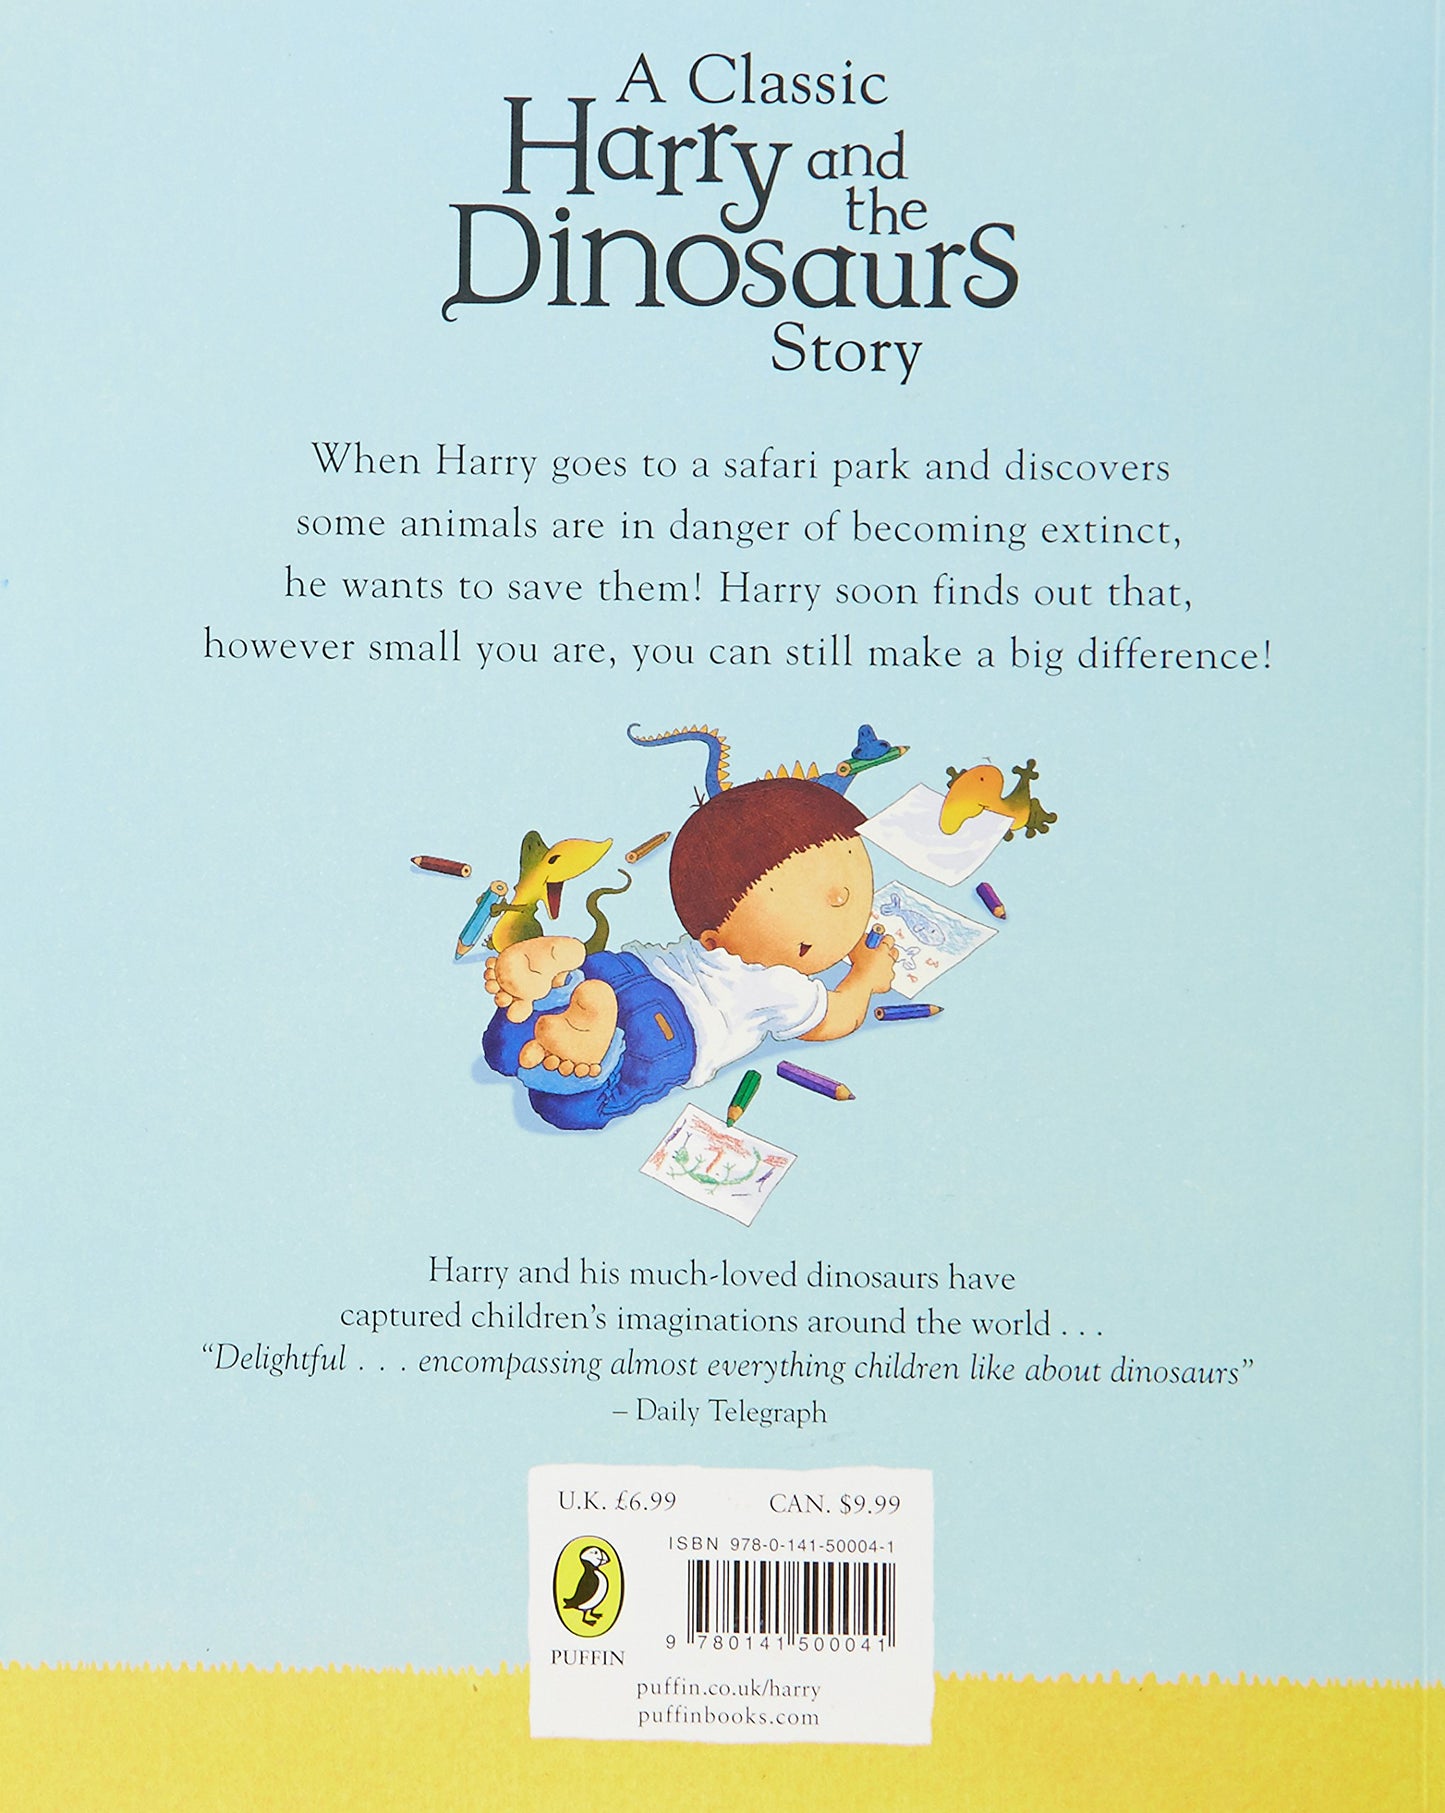 Harry and the Dinosaurs Go Wild by Ian Whybrow and Adrian Reynolds